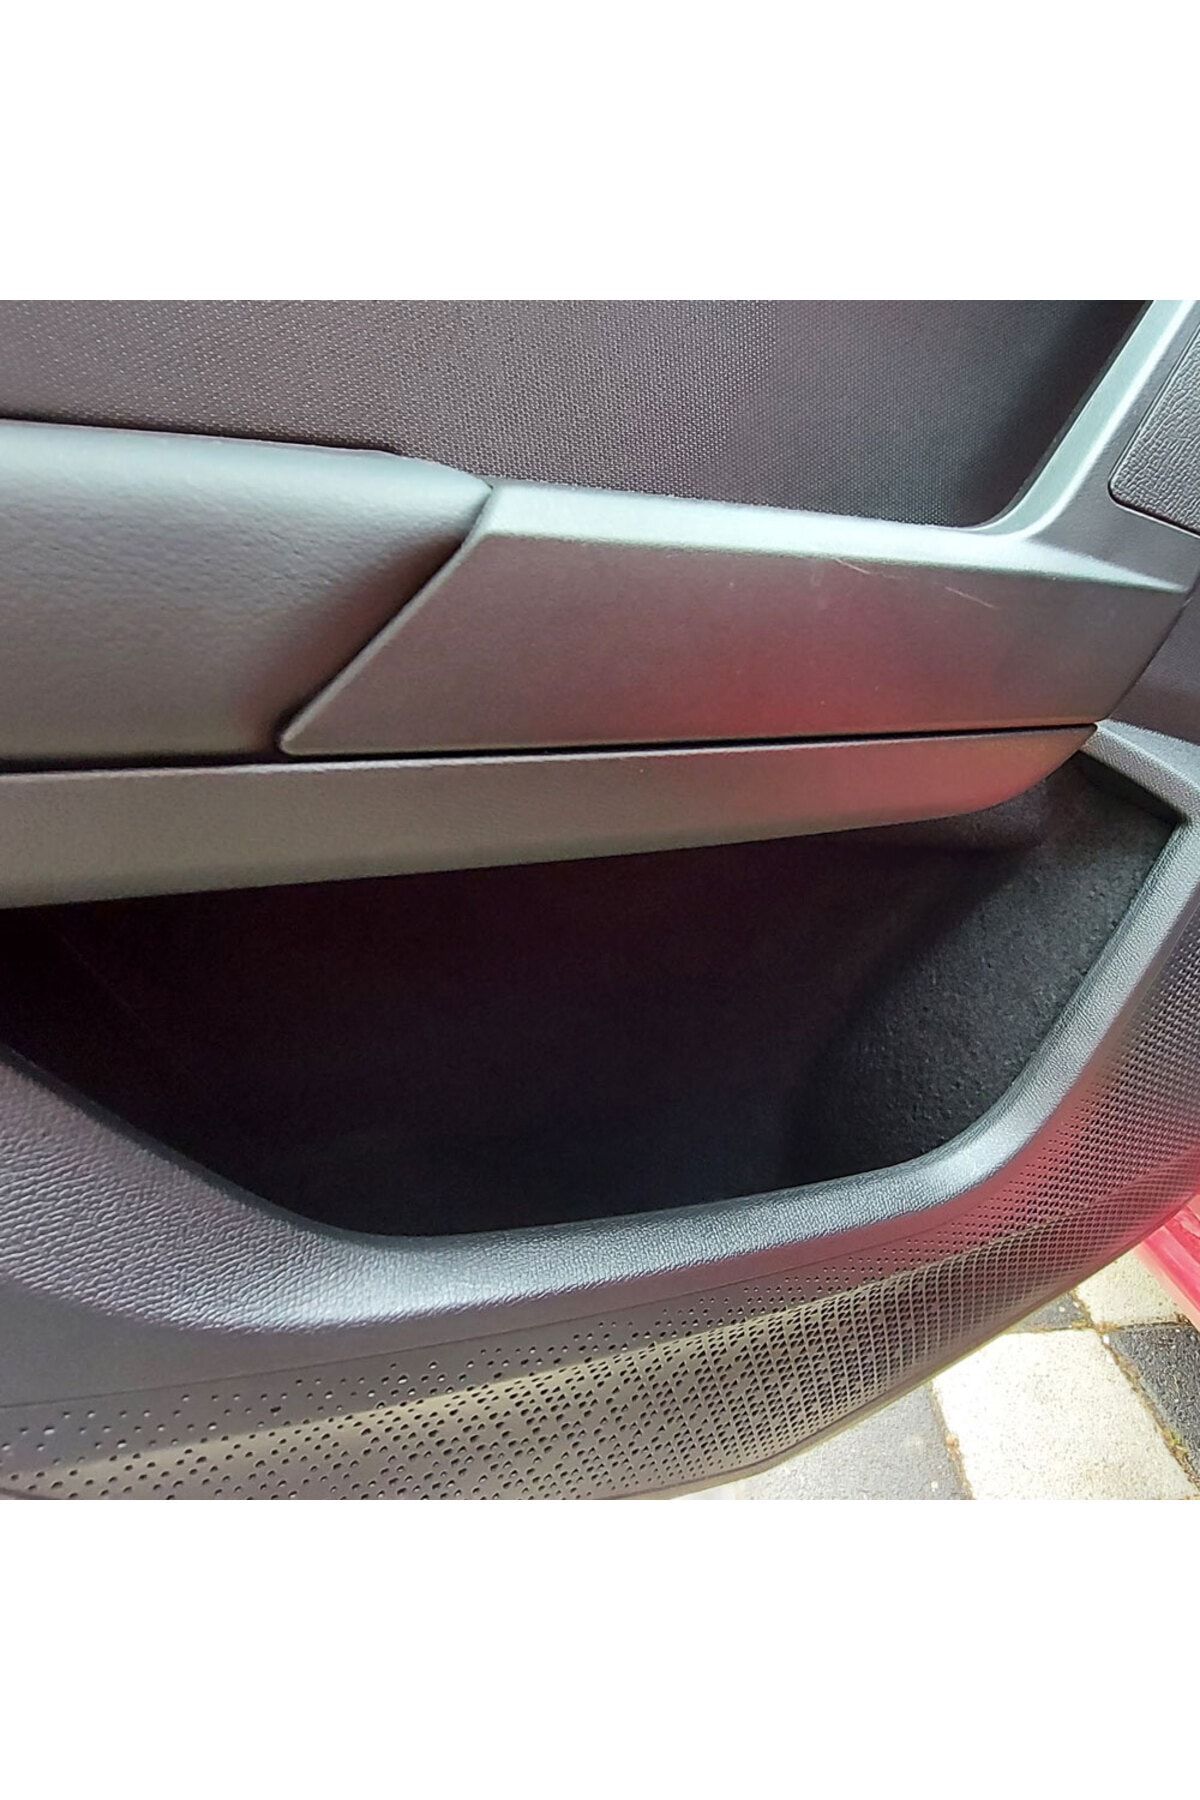 Seat Leon MK4 Ready Made Fabric Covering Car Interior Accessories